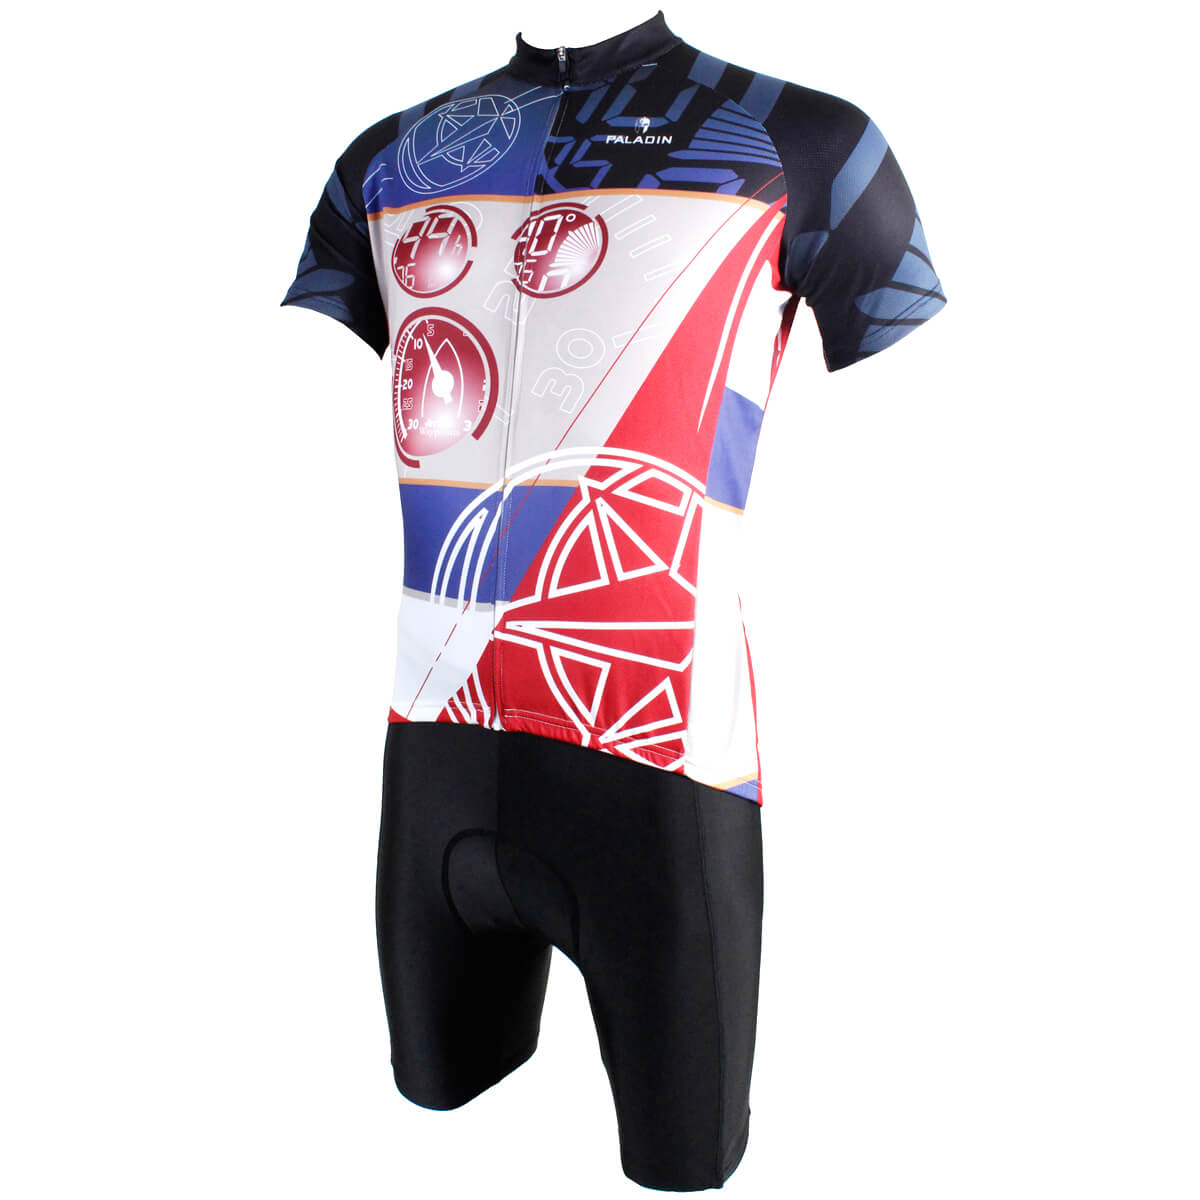 Countdown Design Men's Cycling Suits With Padded Bike Shorts | Chogory